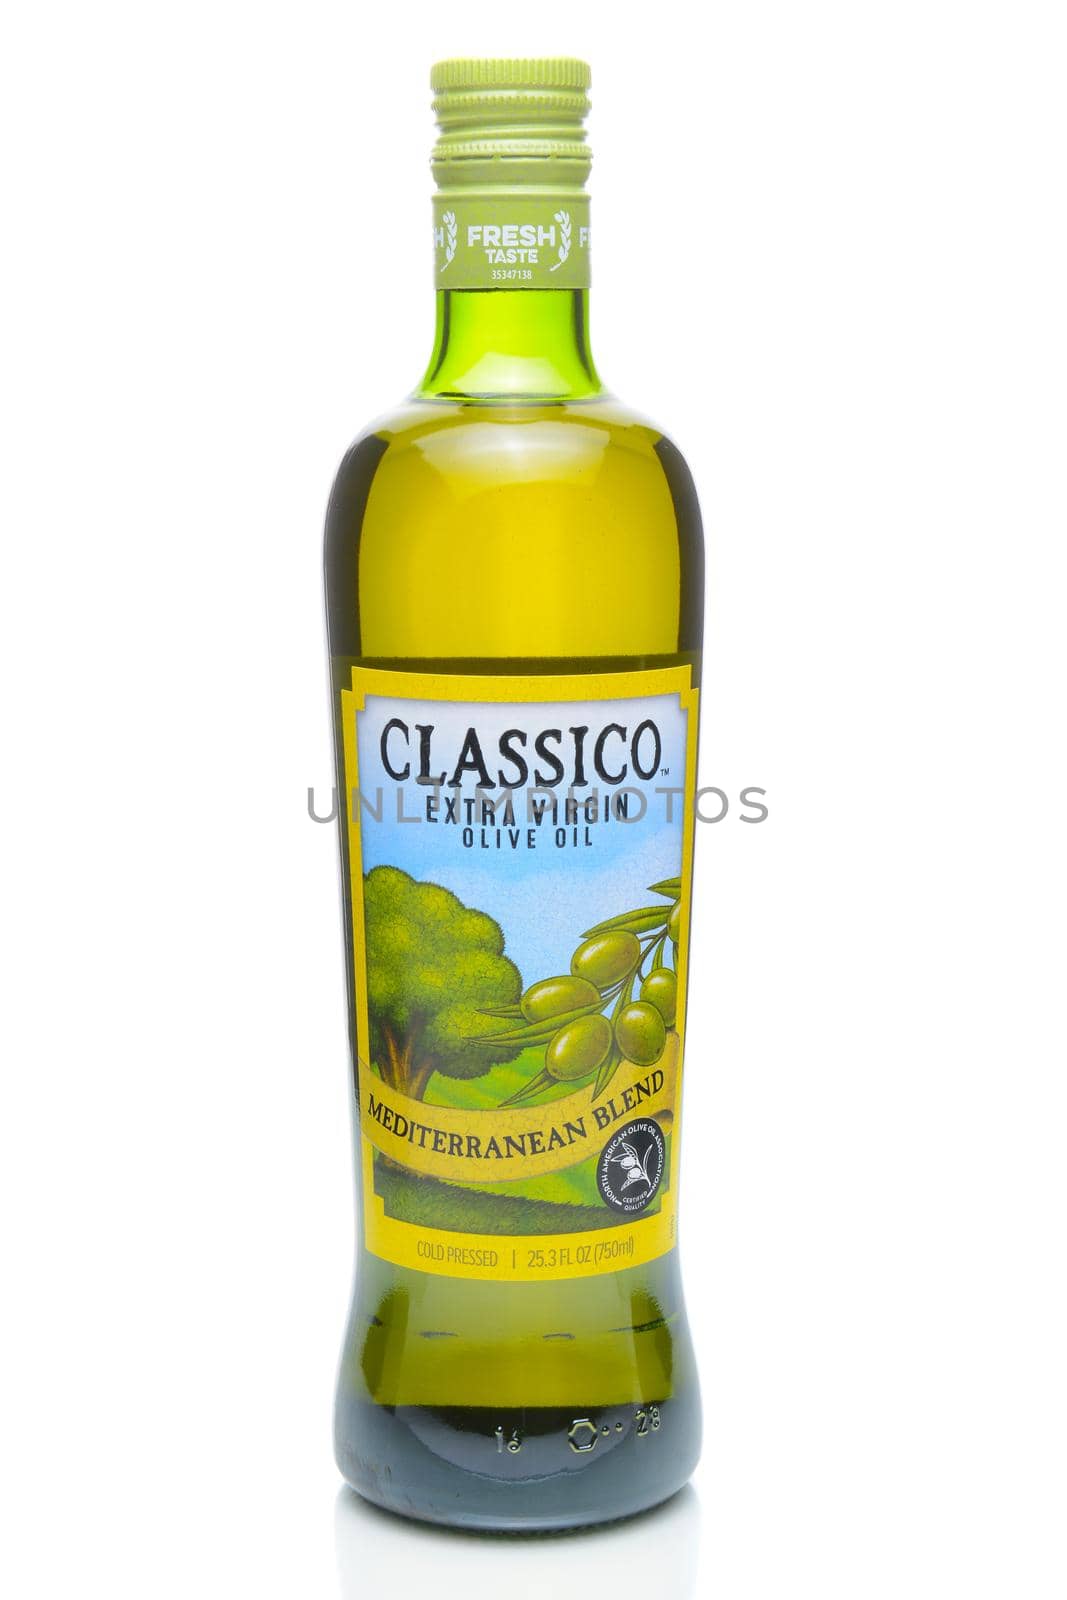 IRVINE, CA - JANUARY 4, 2018: Classico Mediterranean Blend Extra Virgin Olive Oil. The oil is a blend of green and ripe olives.